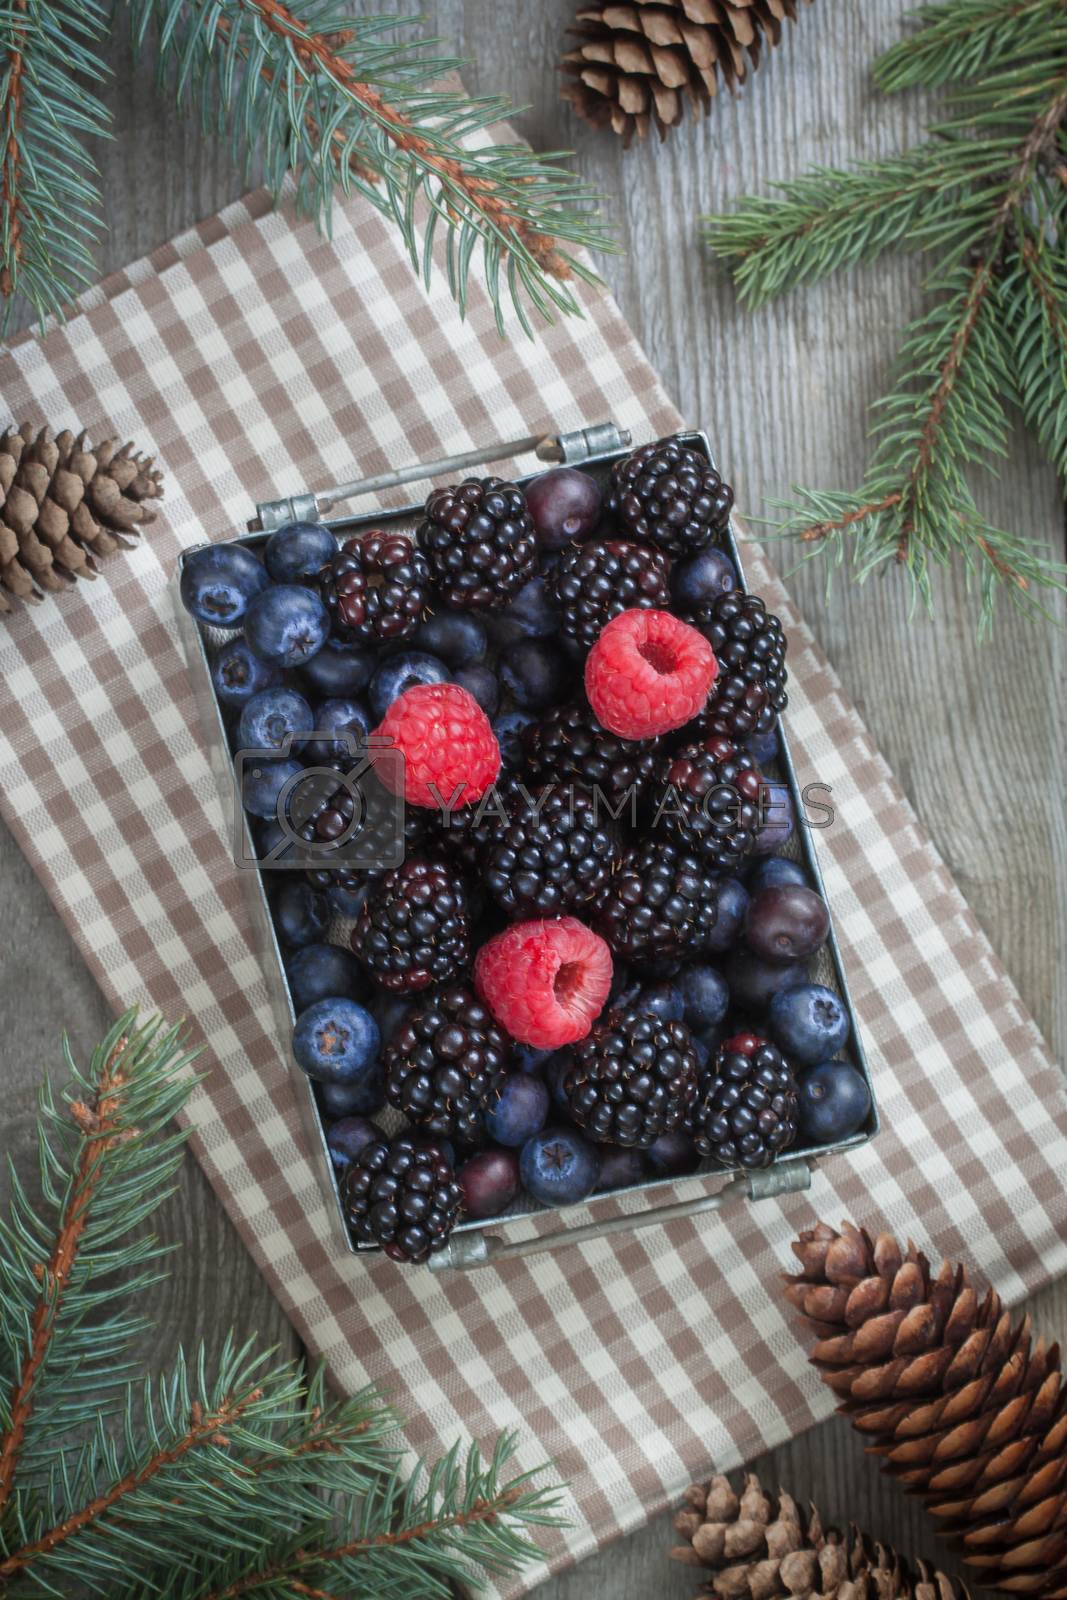 Royalty free image of Fresh berries in the iron box on the beige napkin with cones and Christmas-tree branches. Rustic background. by Katia1504